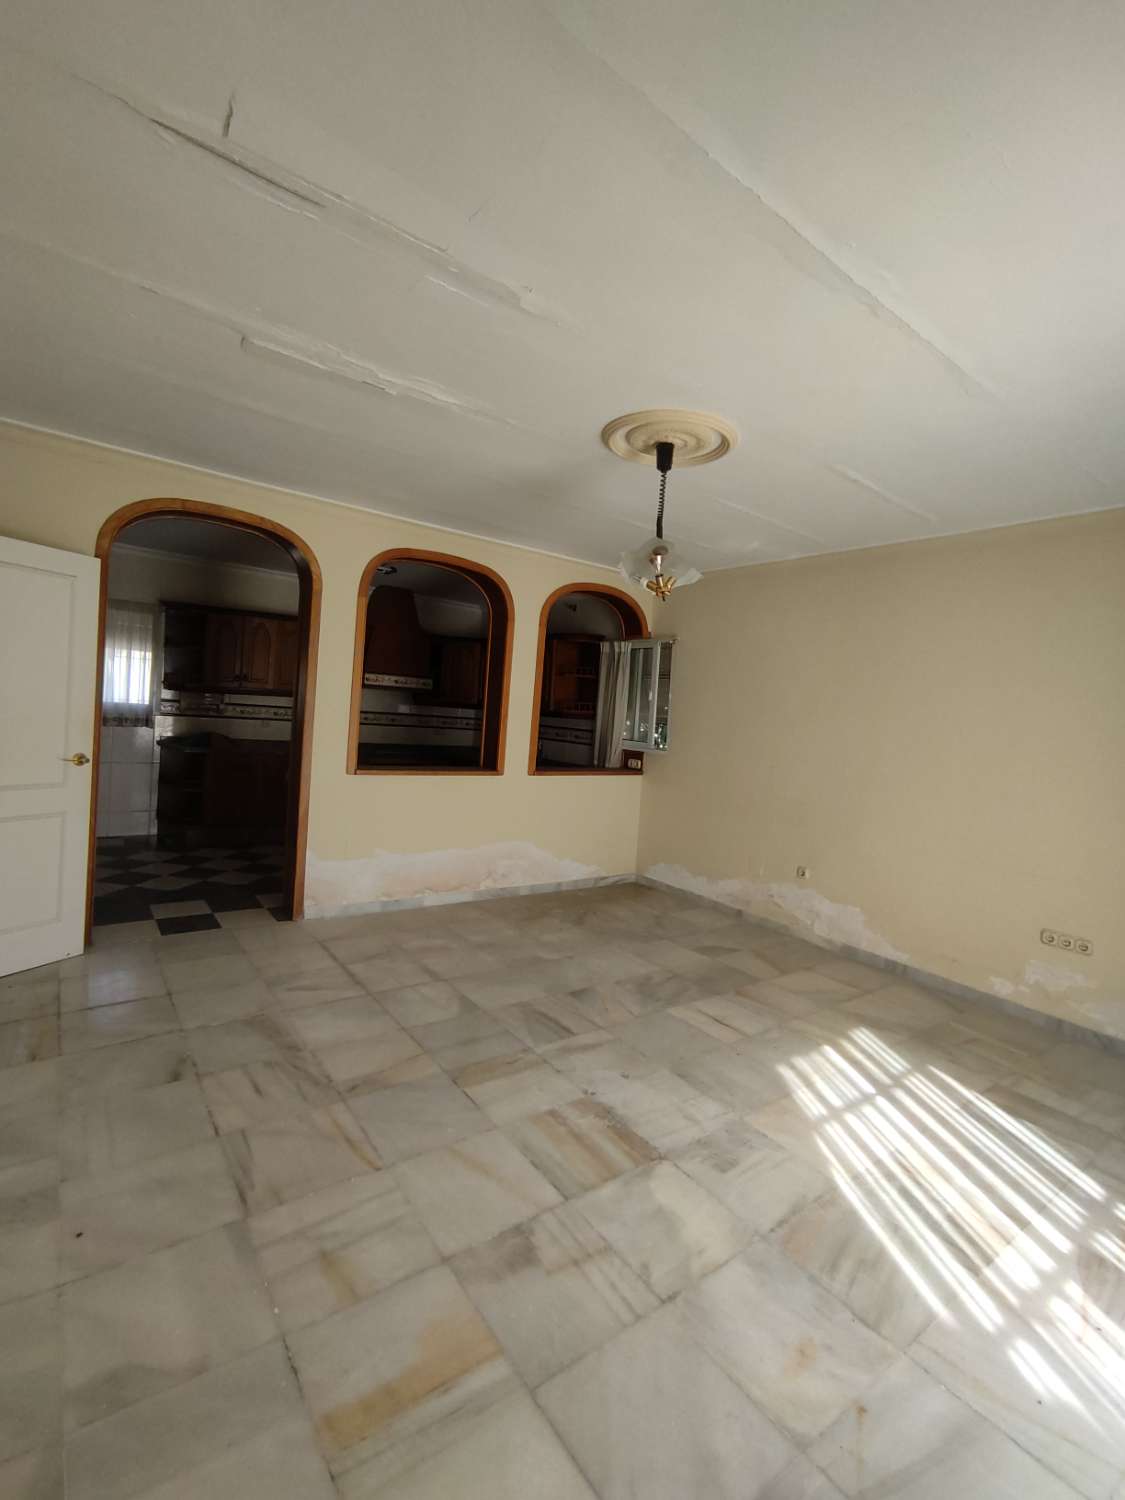 This local is available to purchase, rent or rent with option to purchase. It is situated in a busy part of Calahonda.